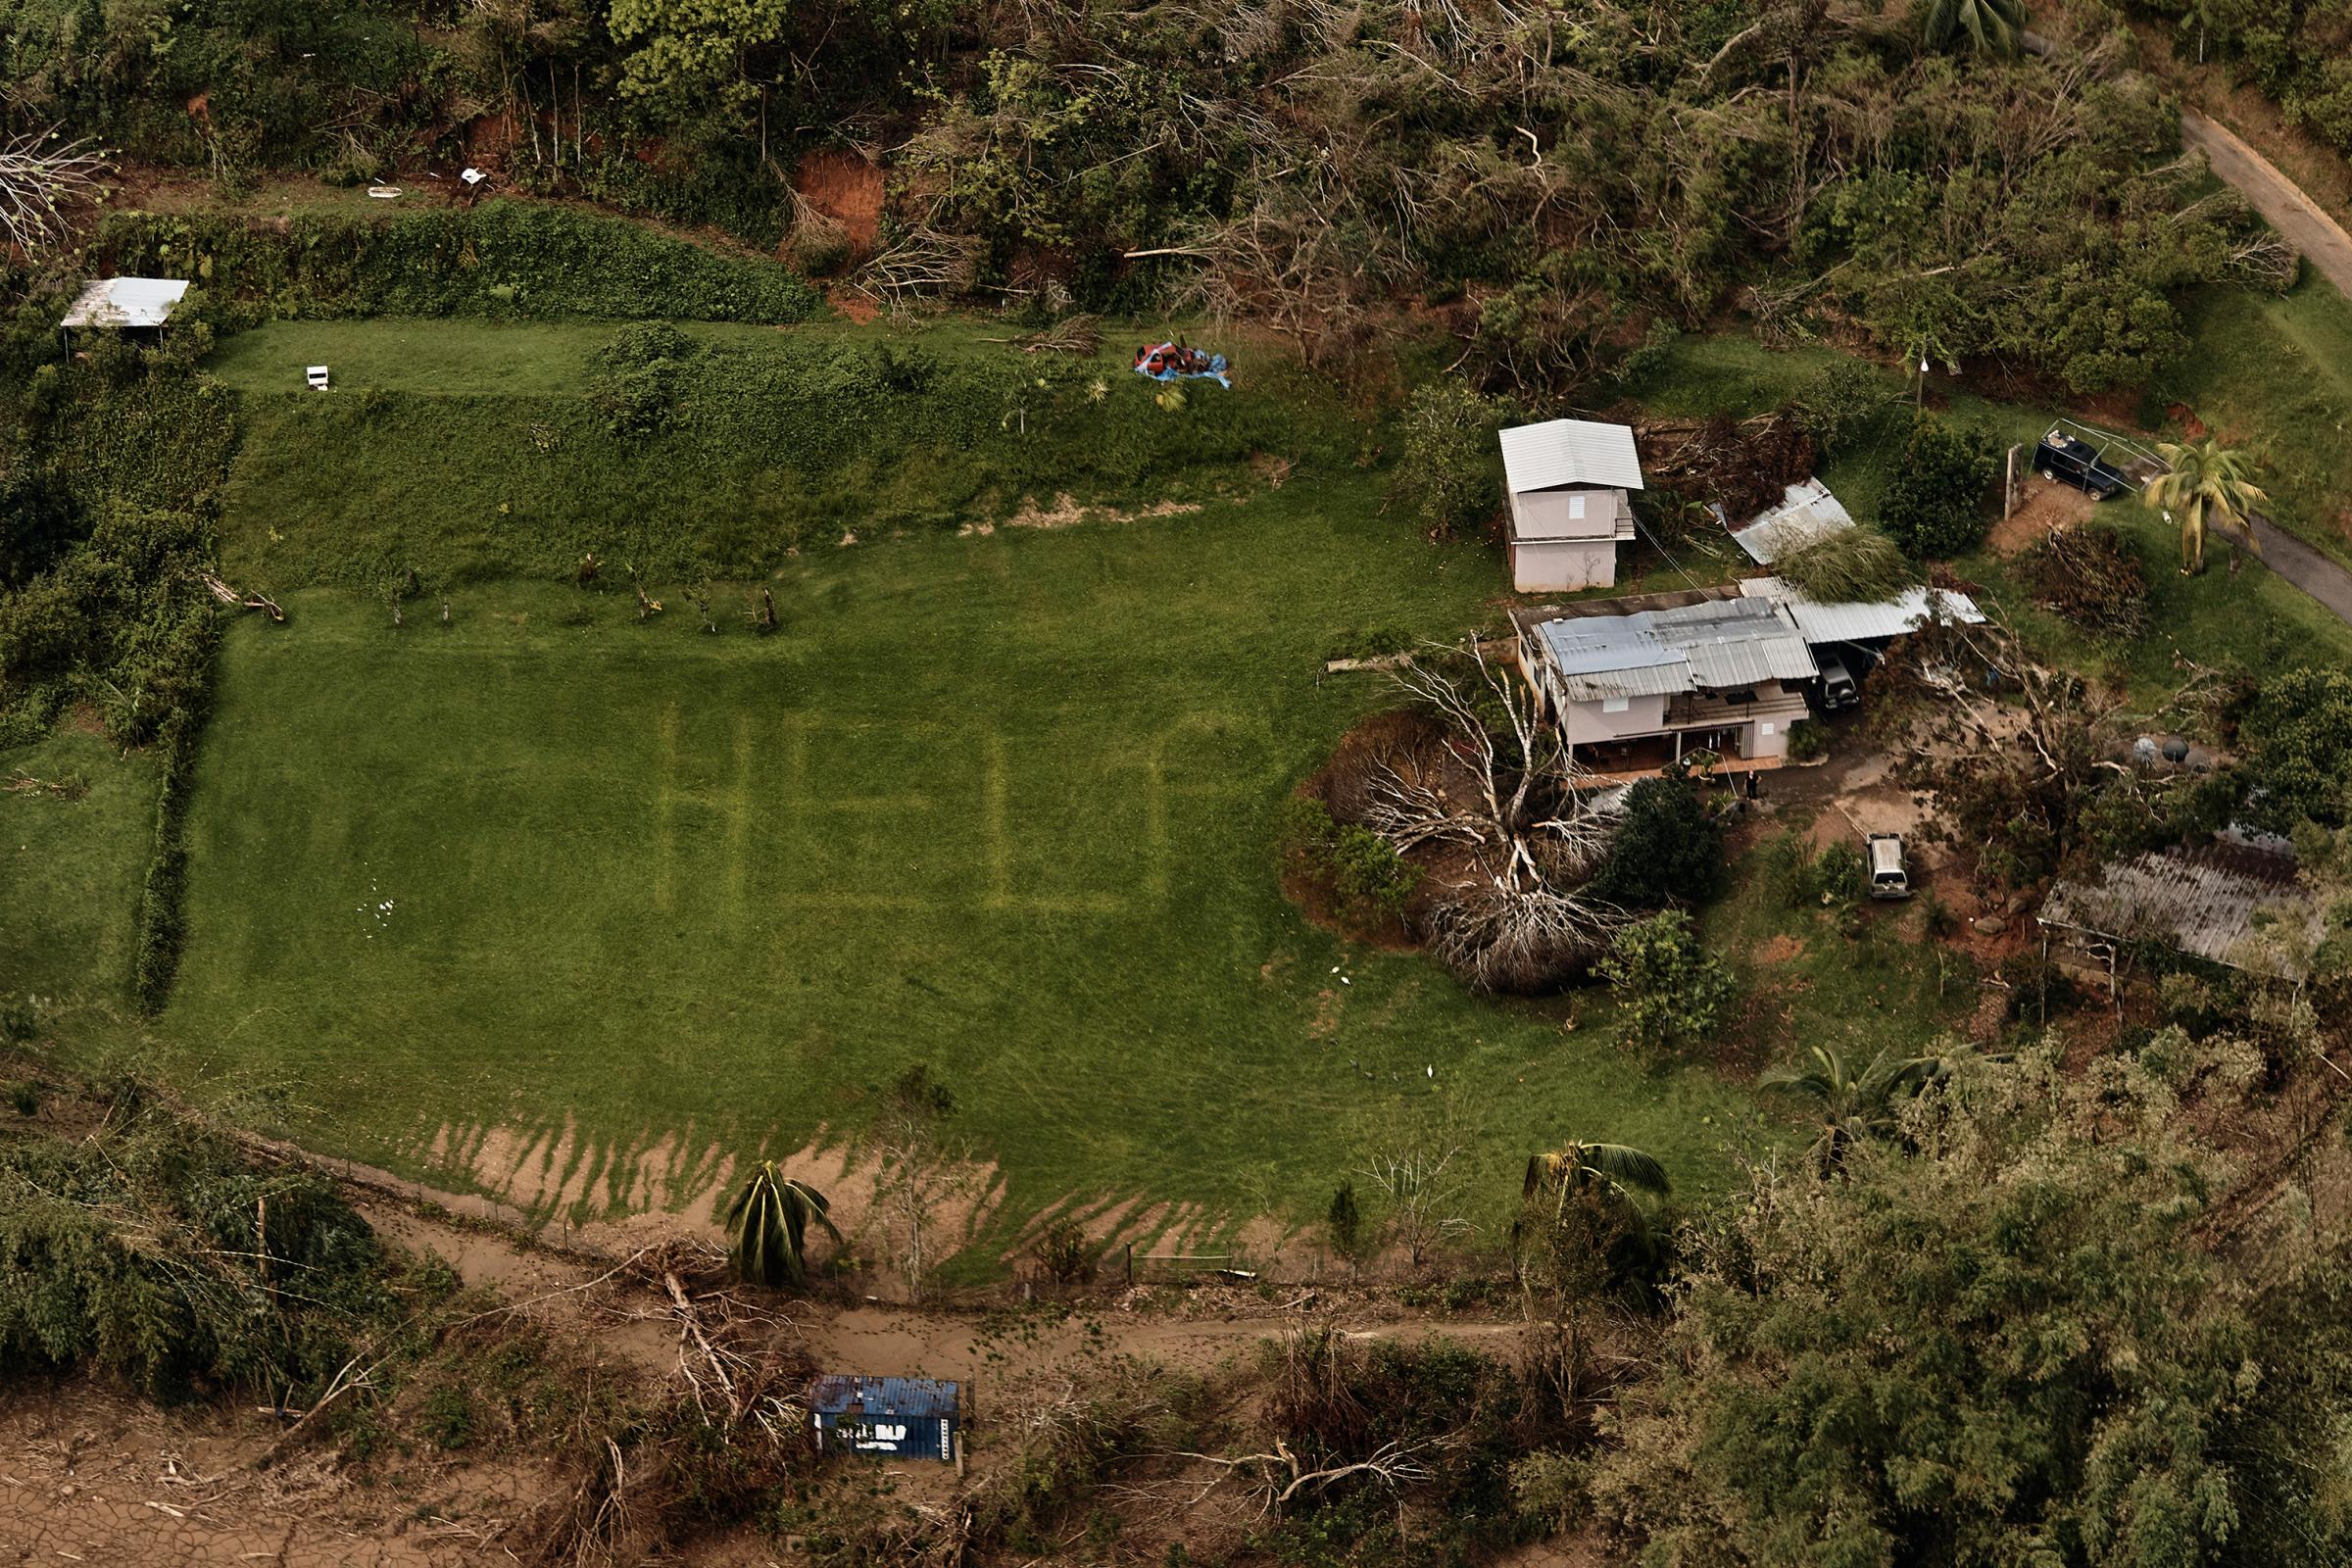 The desperate message “HELP” is seen on the lawn of a home near Utuado, Puerto Rico, in early October. Photographer @andreskudacki, who was covering the aftermath of Hurricane Maria for TIME, came across this scene during a helicopter flyover in the central mountainous region, where rescuers had previously searched for those in need. Police who originally saw the sign landed to find people without food or water, isolated as a nearby river swelled.